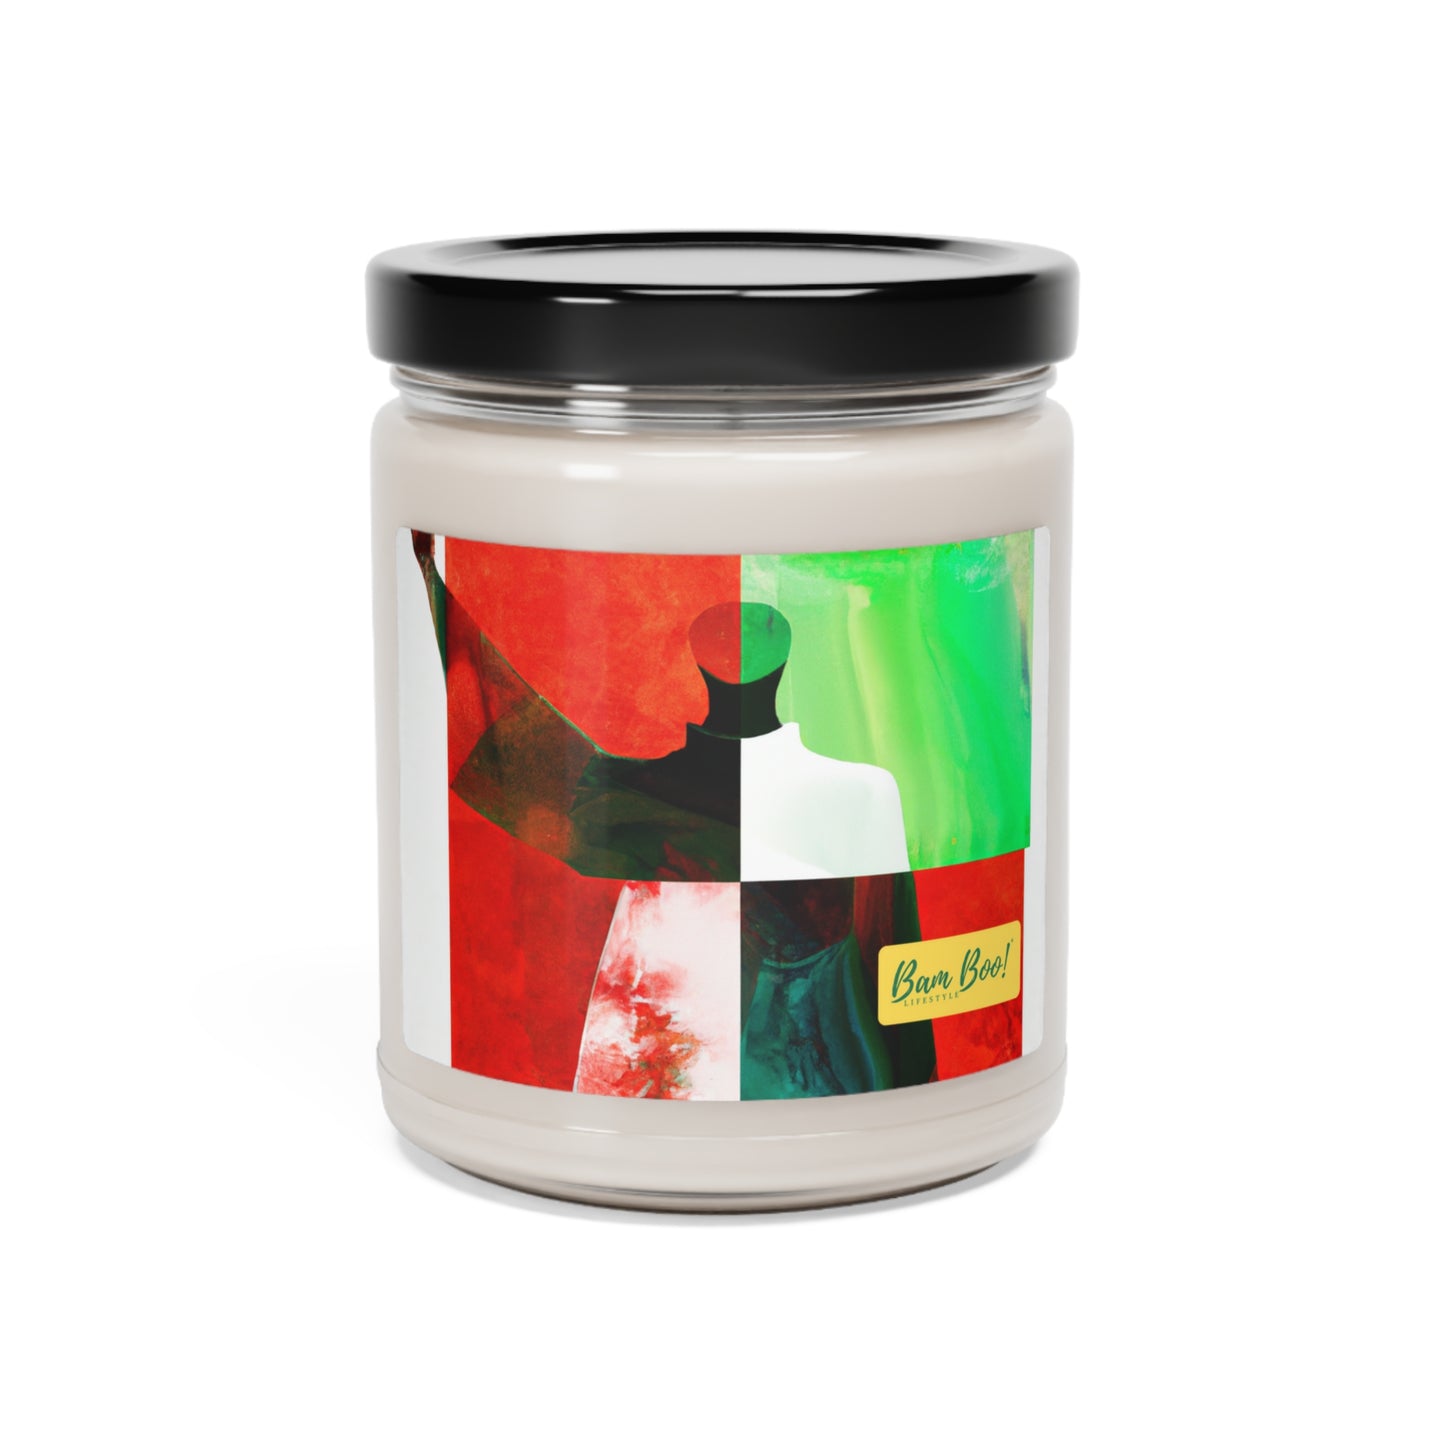 "Mosaic of Perspectives" - Bam Boo! Lifestyle Eco-friendly Soy Candle